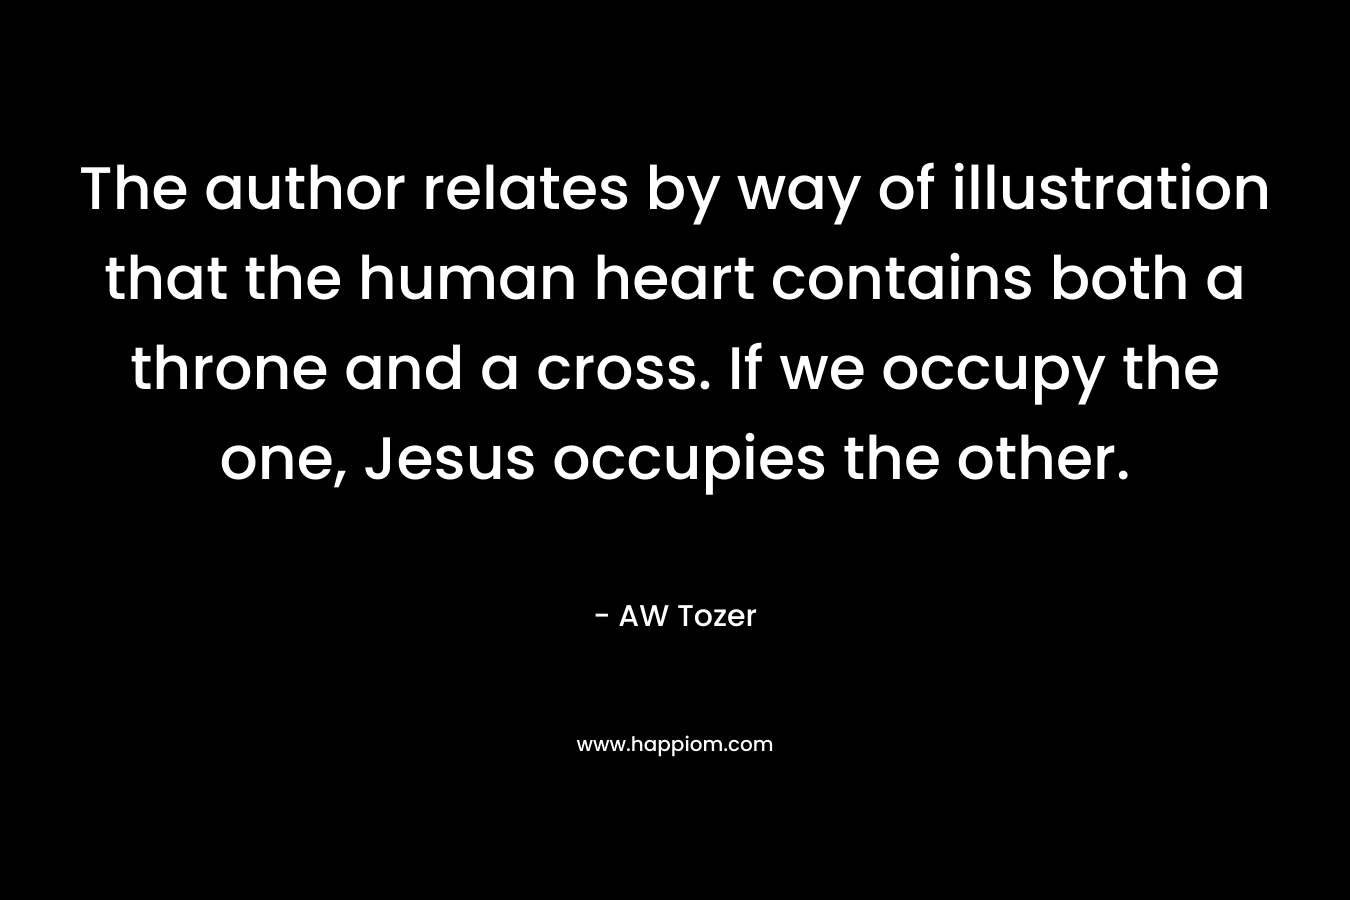 The author relates by way of illustration that the human heart contains both a throne and a cross. If we occupy the one, Jesus occupies the other. – AW Tozer